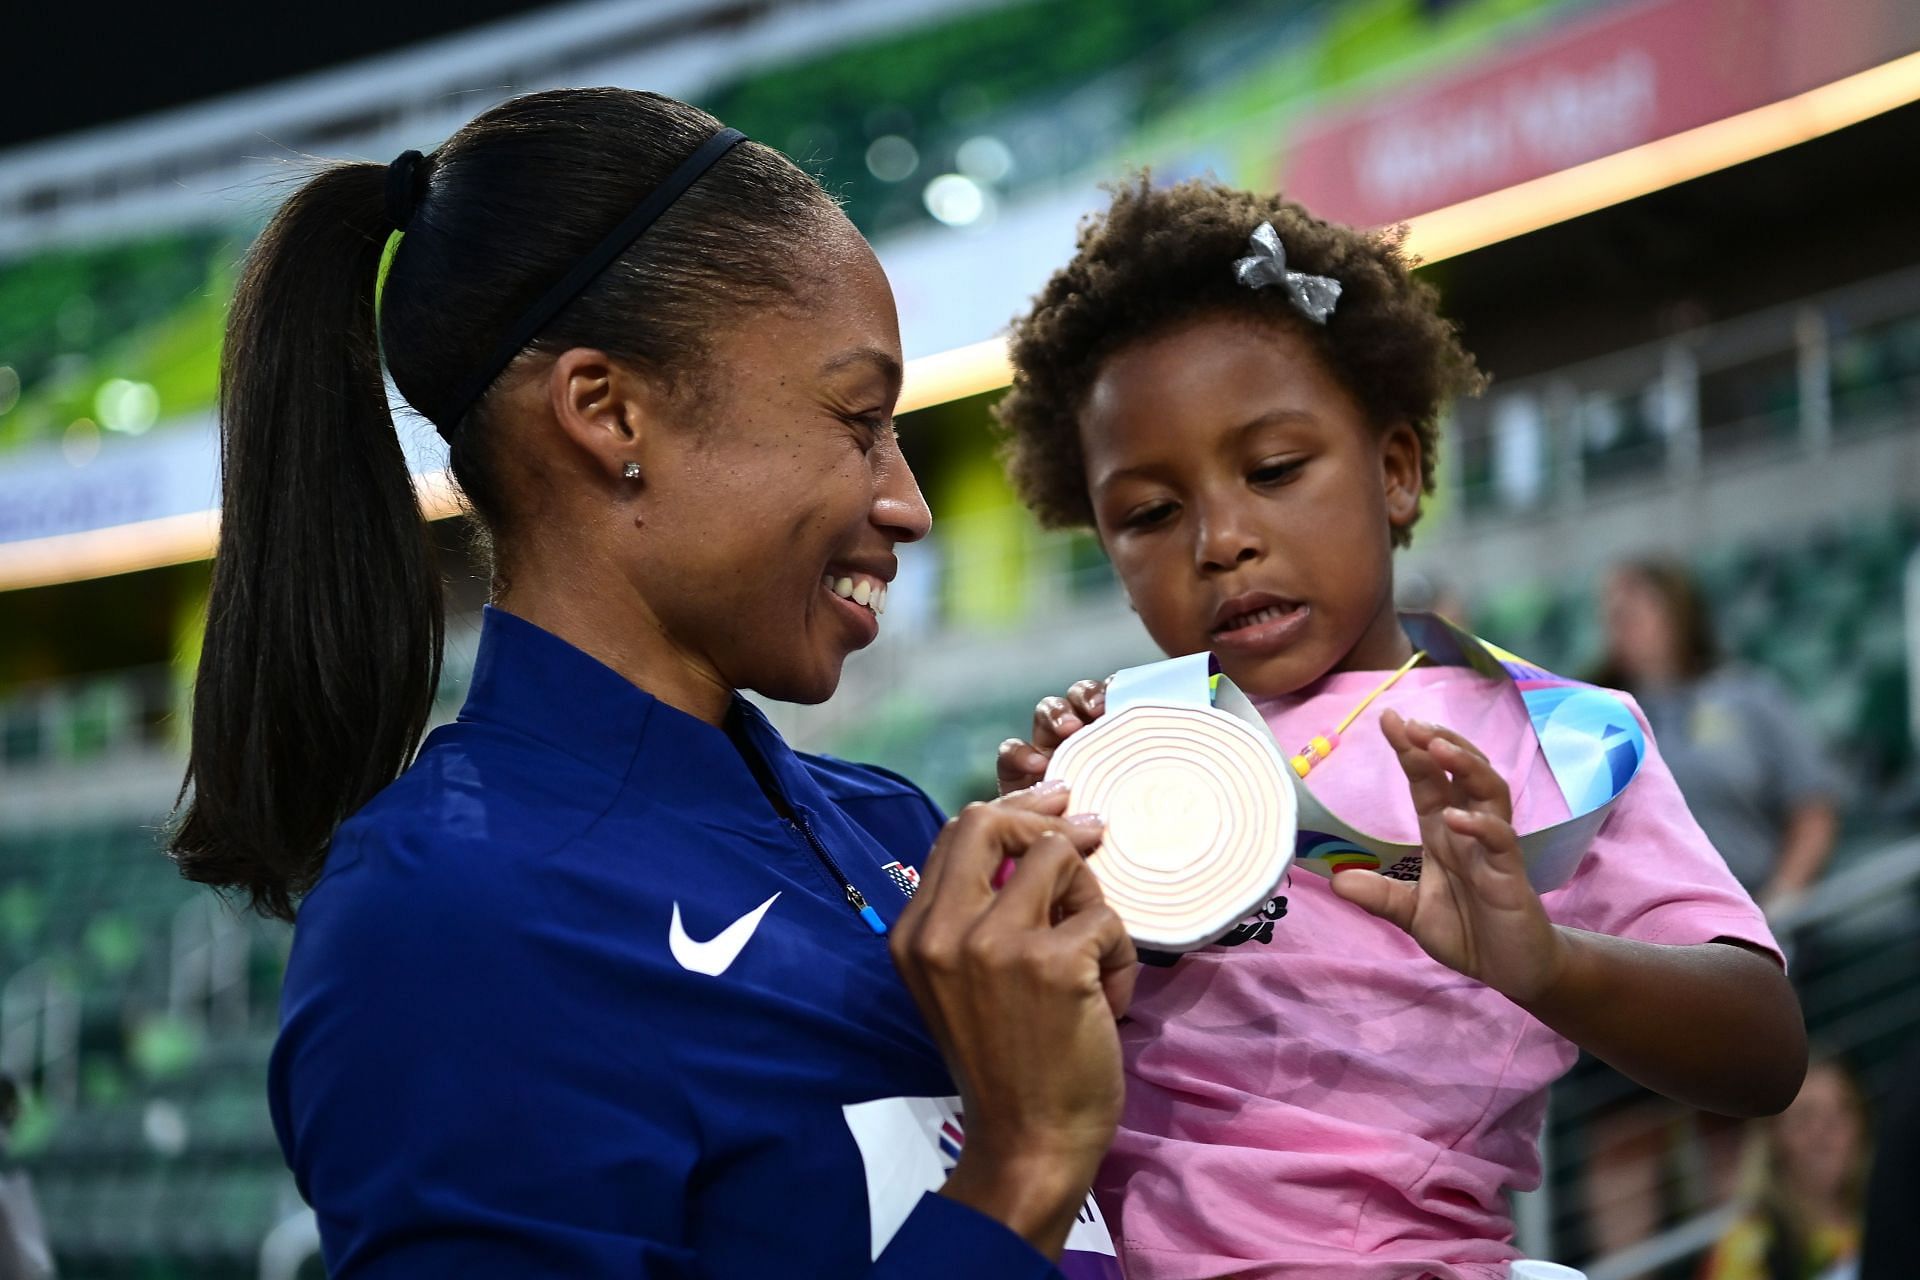 Allyson Felix with her daughter Camyrn after winning a bronze medal in the 4x400m mixed relay at the 2022 World Athletics Championships in Eugene, Oregon